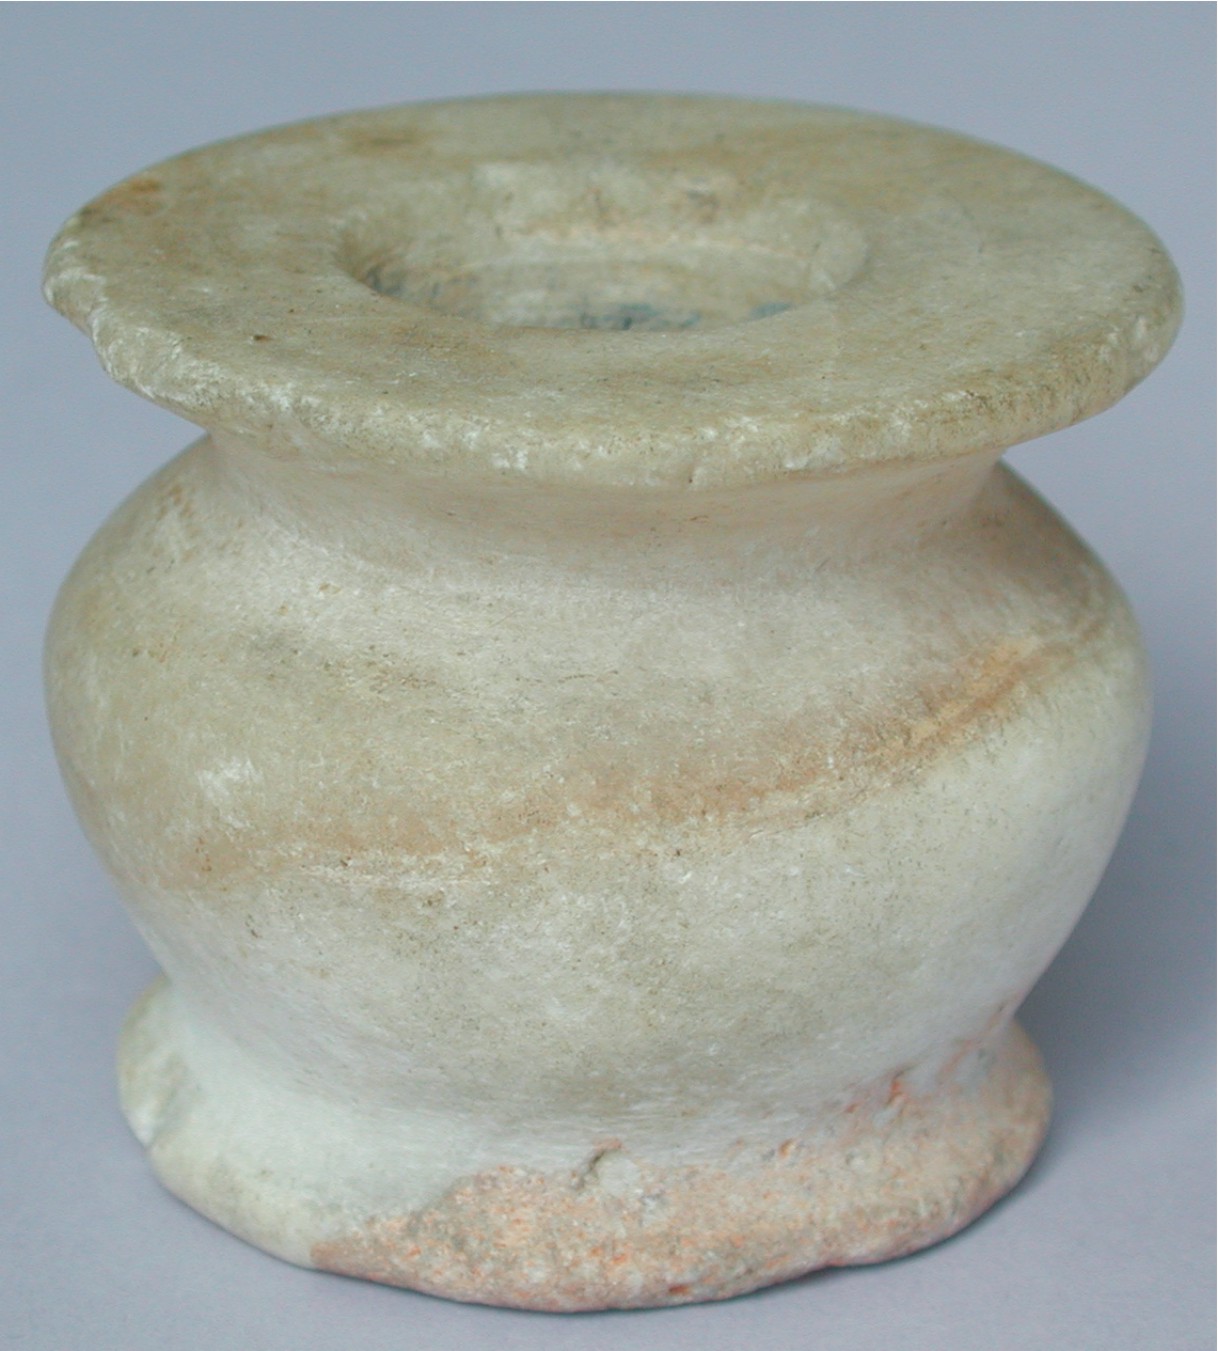 Image for: Travertine cosmetic vessel